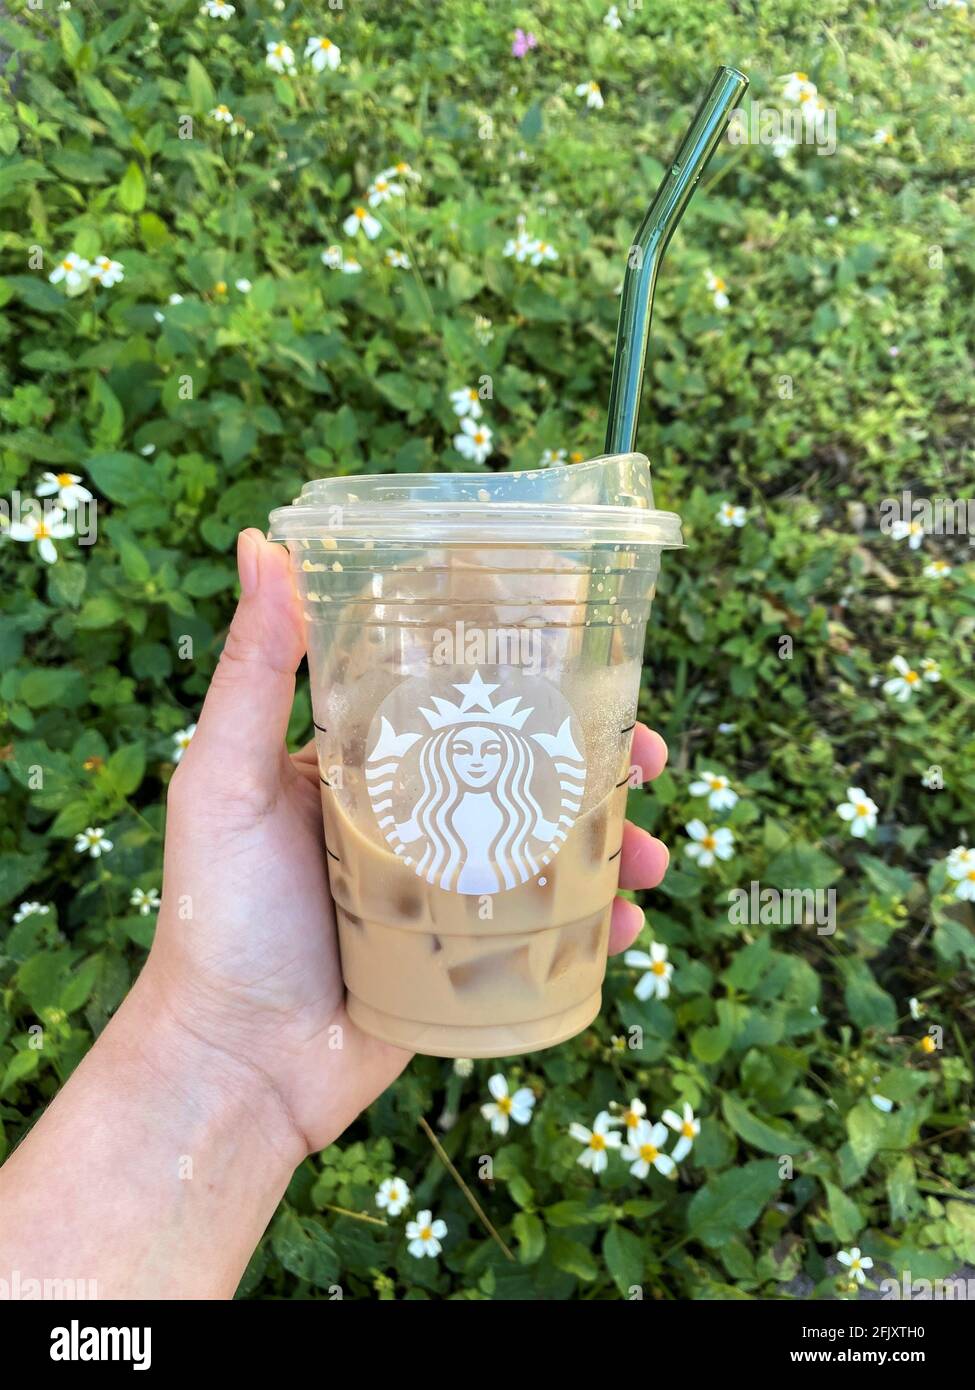 https://c8.alamy.com/comp/2FJXTH0/holding-a-glass-straw-in-a-starbucks-coffee-cup-aimed-to-reduce-the-need-of-single-use-plastic-straws-by-using-reusable-straws-green-grass-background-2FJXTH0.jpg